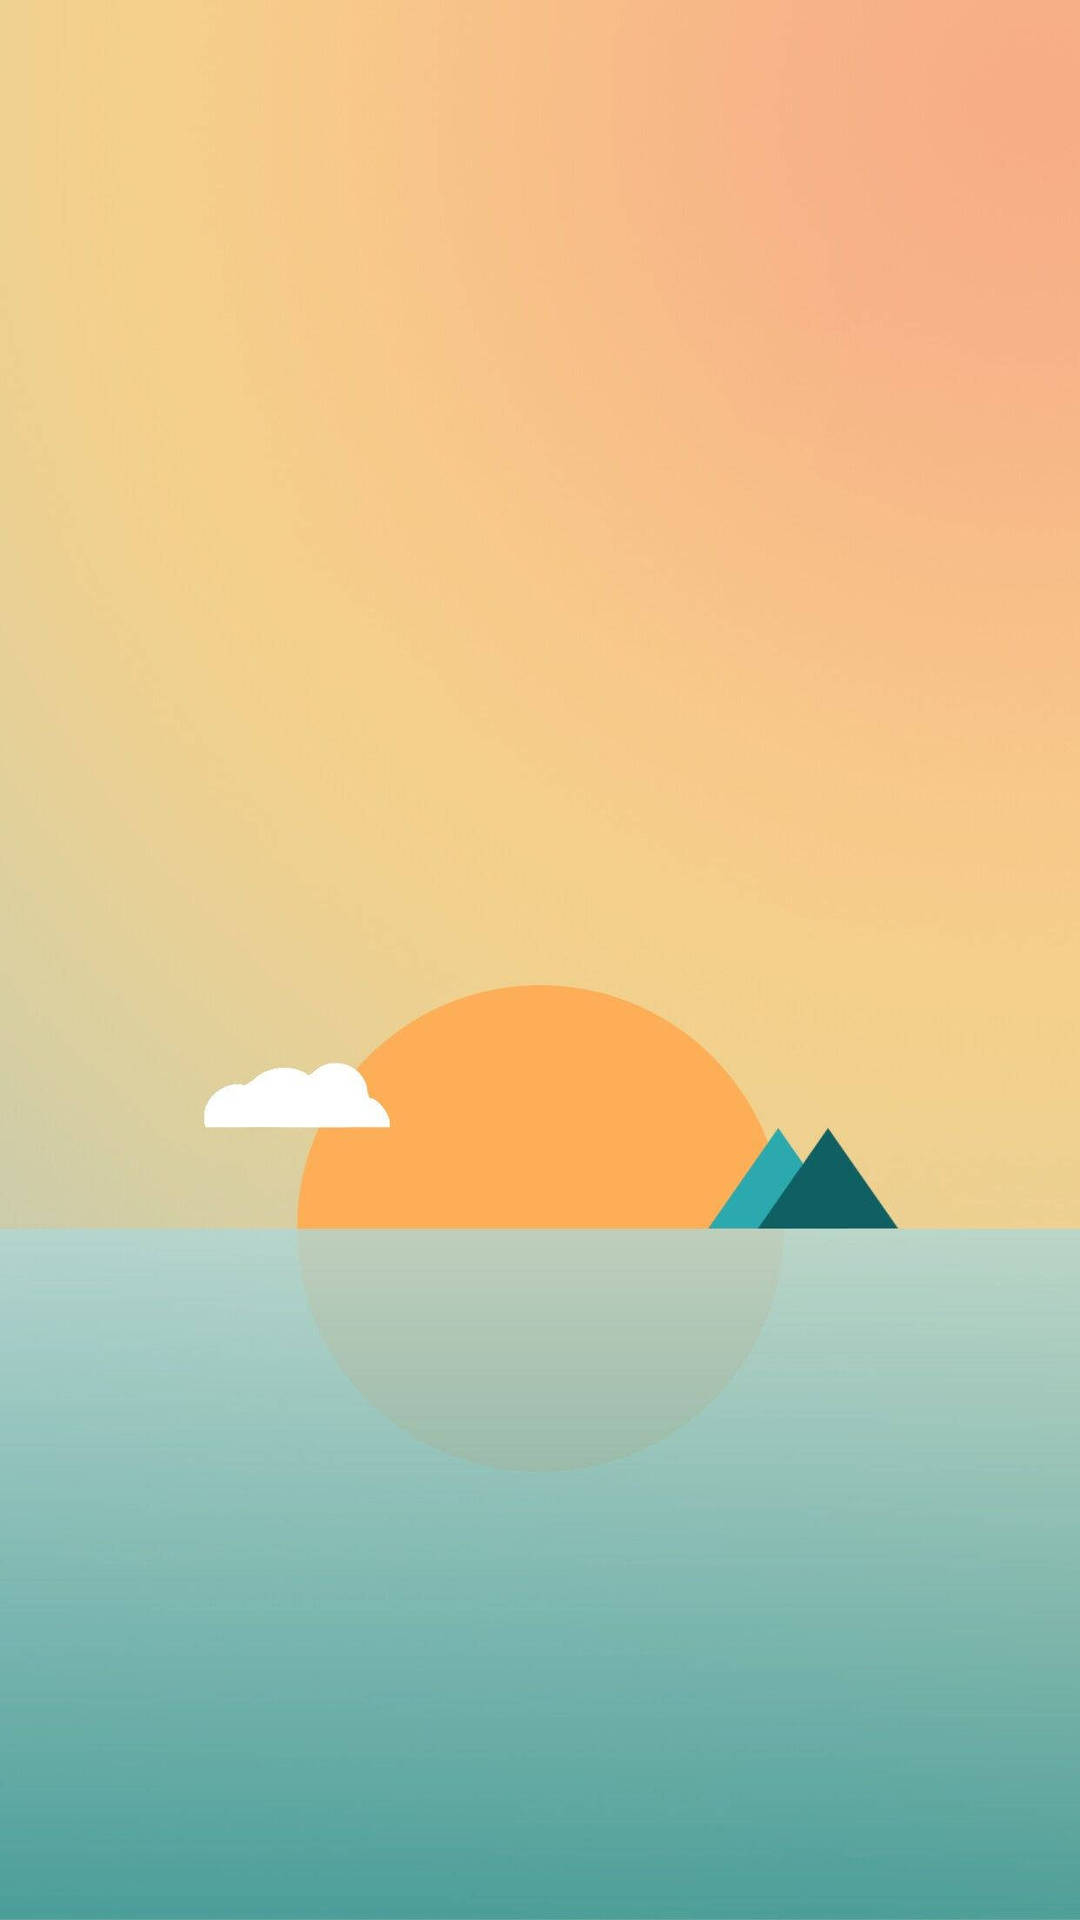 Sunset Iphone Themed